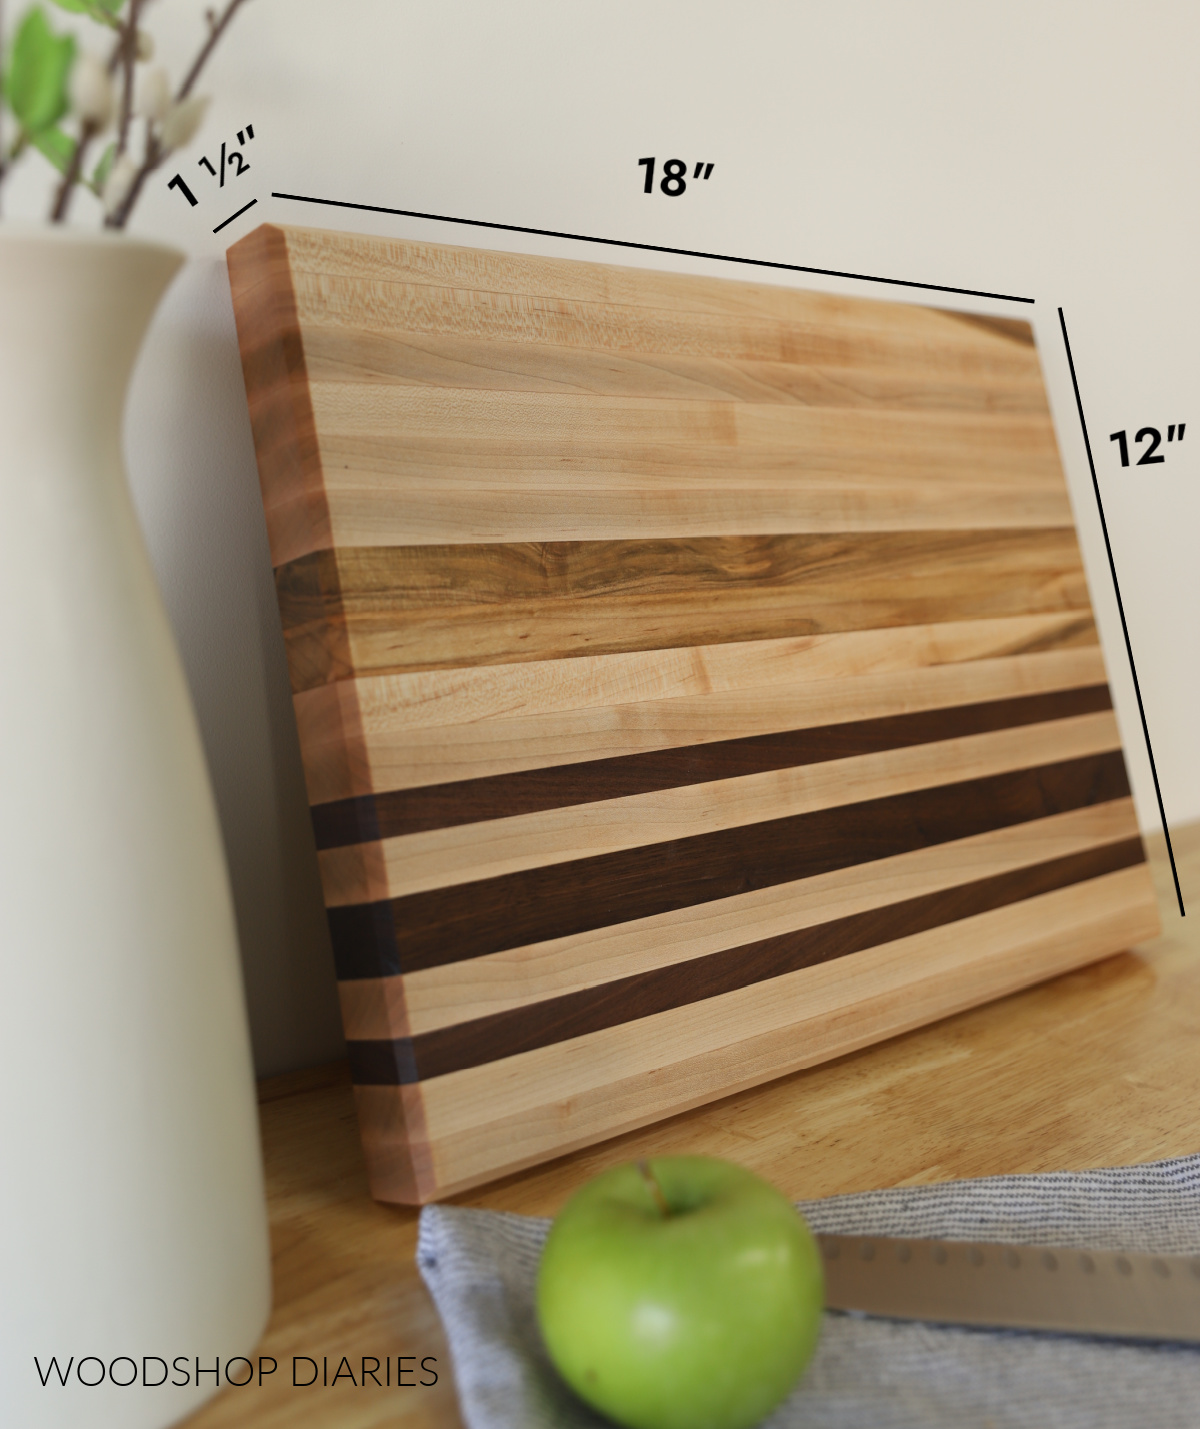 cutting board propped against the wall with dimensions showing 1 ½" thick, 18" long and 12" wide